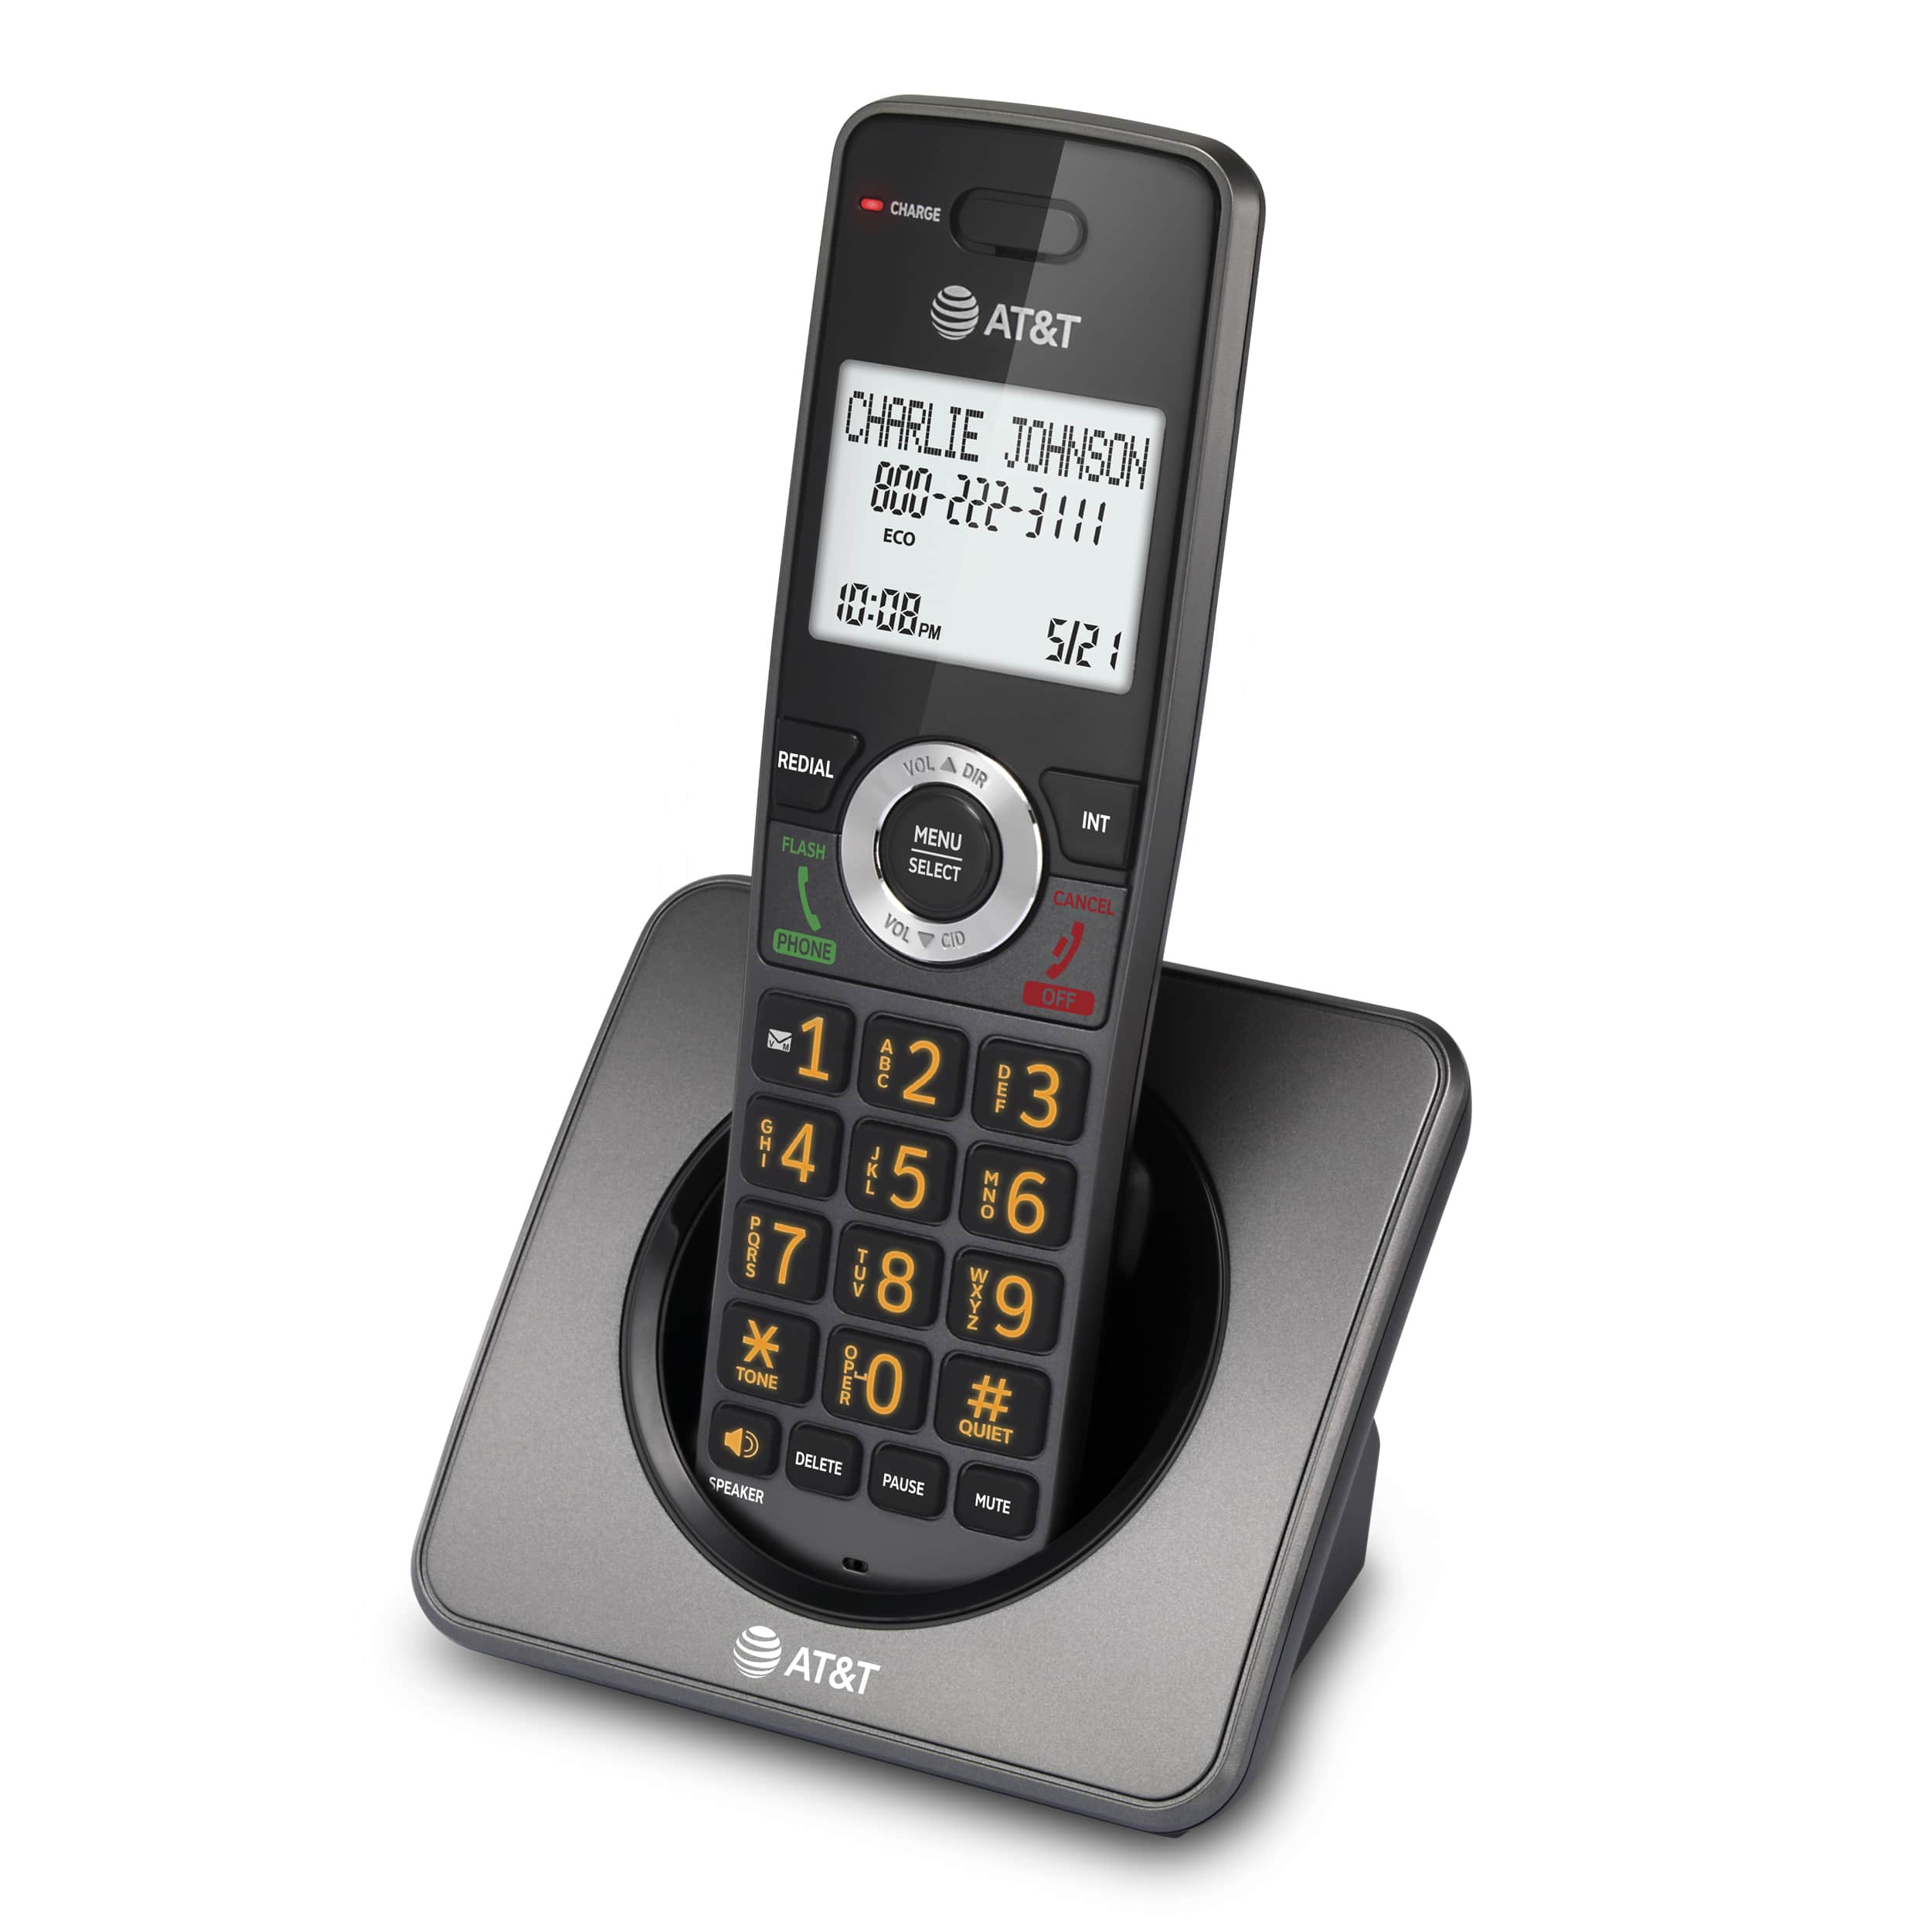 Cordless Home Phone with Call Block (Graphite & Black) - view 3